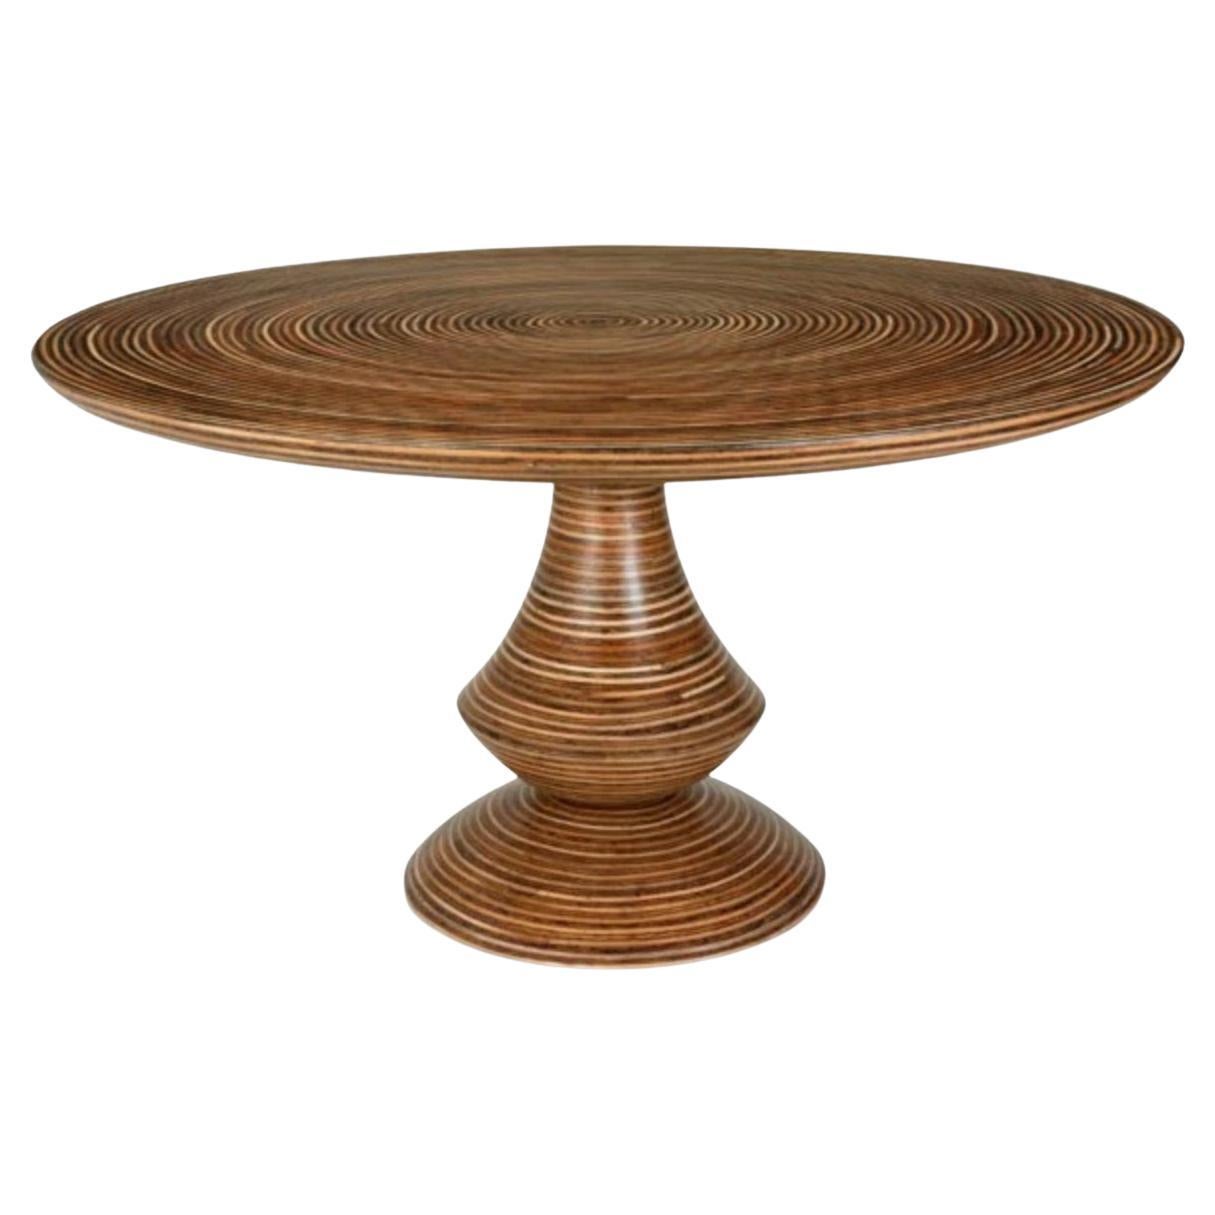 Coconut Dining Room Tables